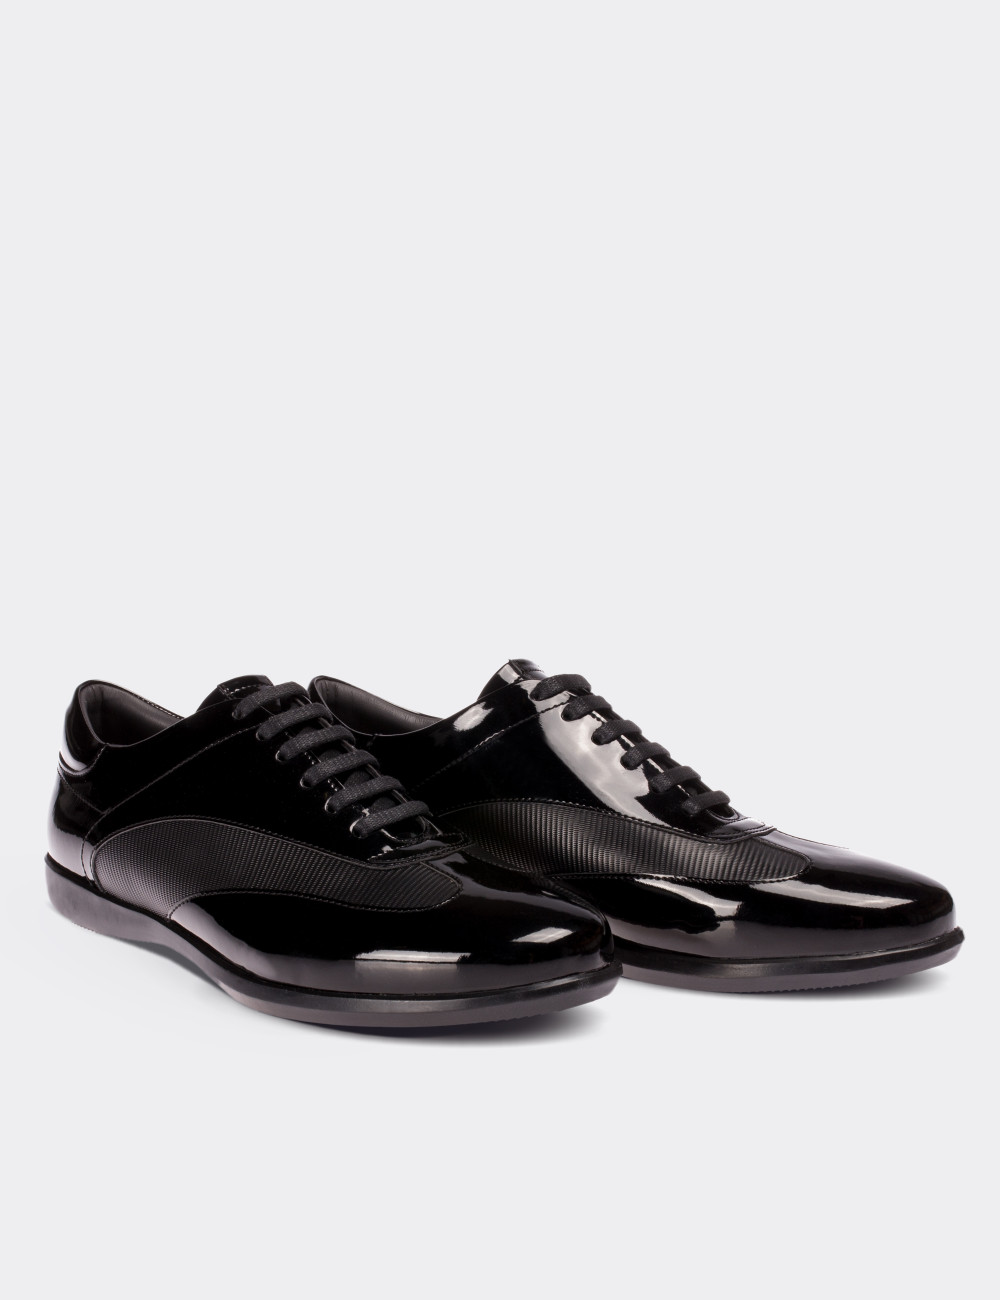 Black Patent Leather Lace-up Shoes - 01686MSYHC02